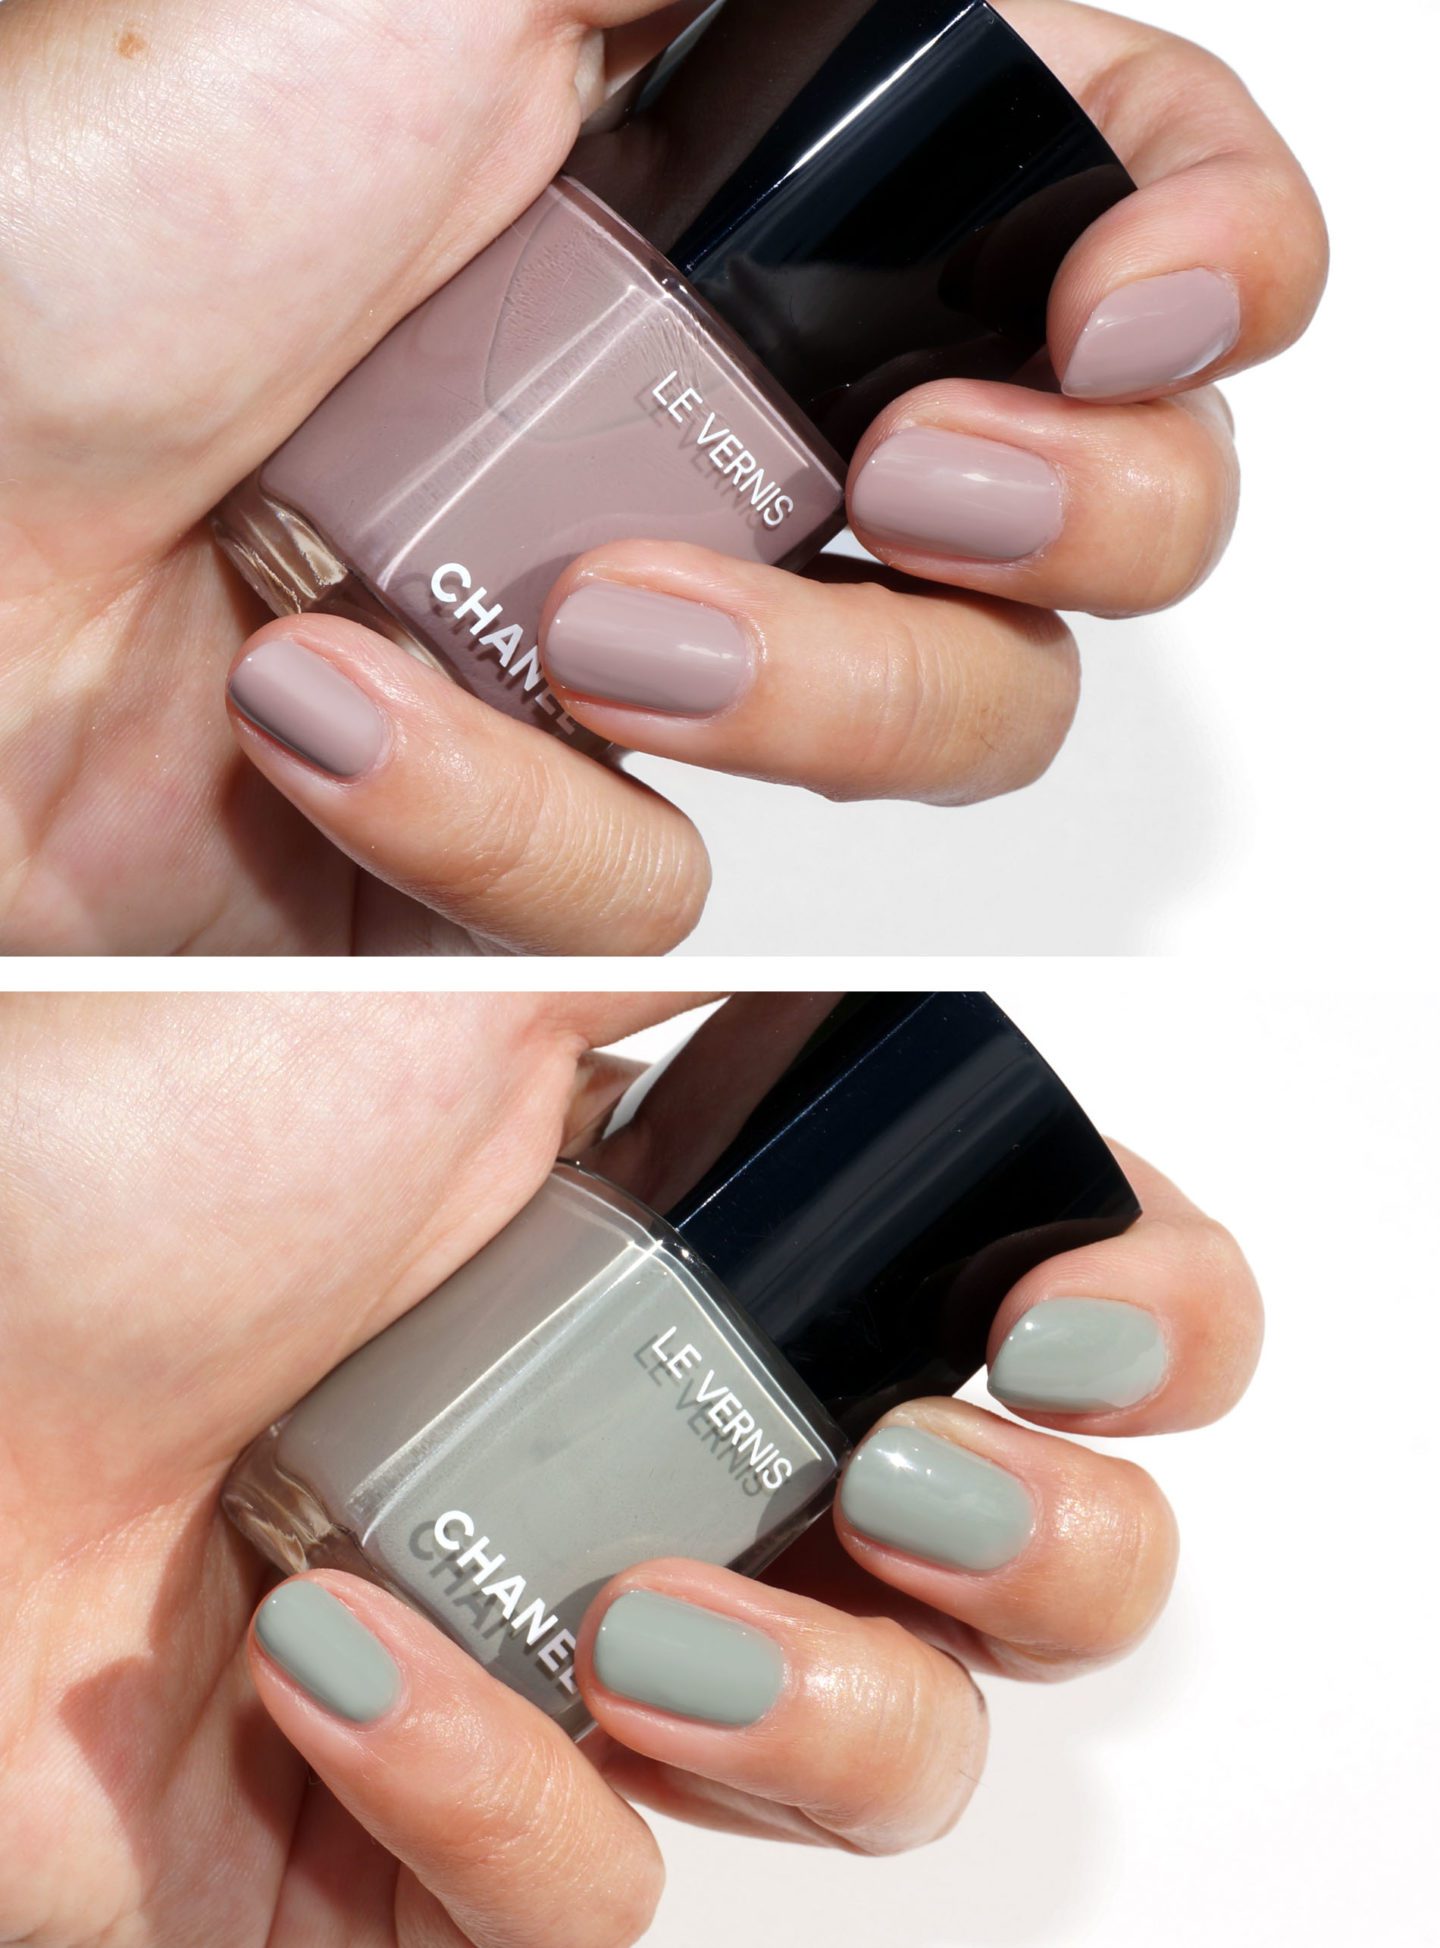 Chanel Le Vernis New Dawn (mauve) and Horizon Line (green) | The Beauty Look Book 